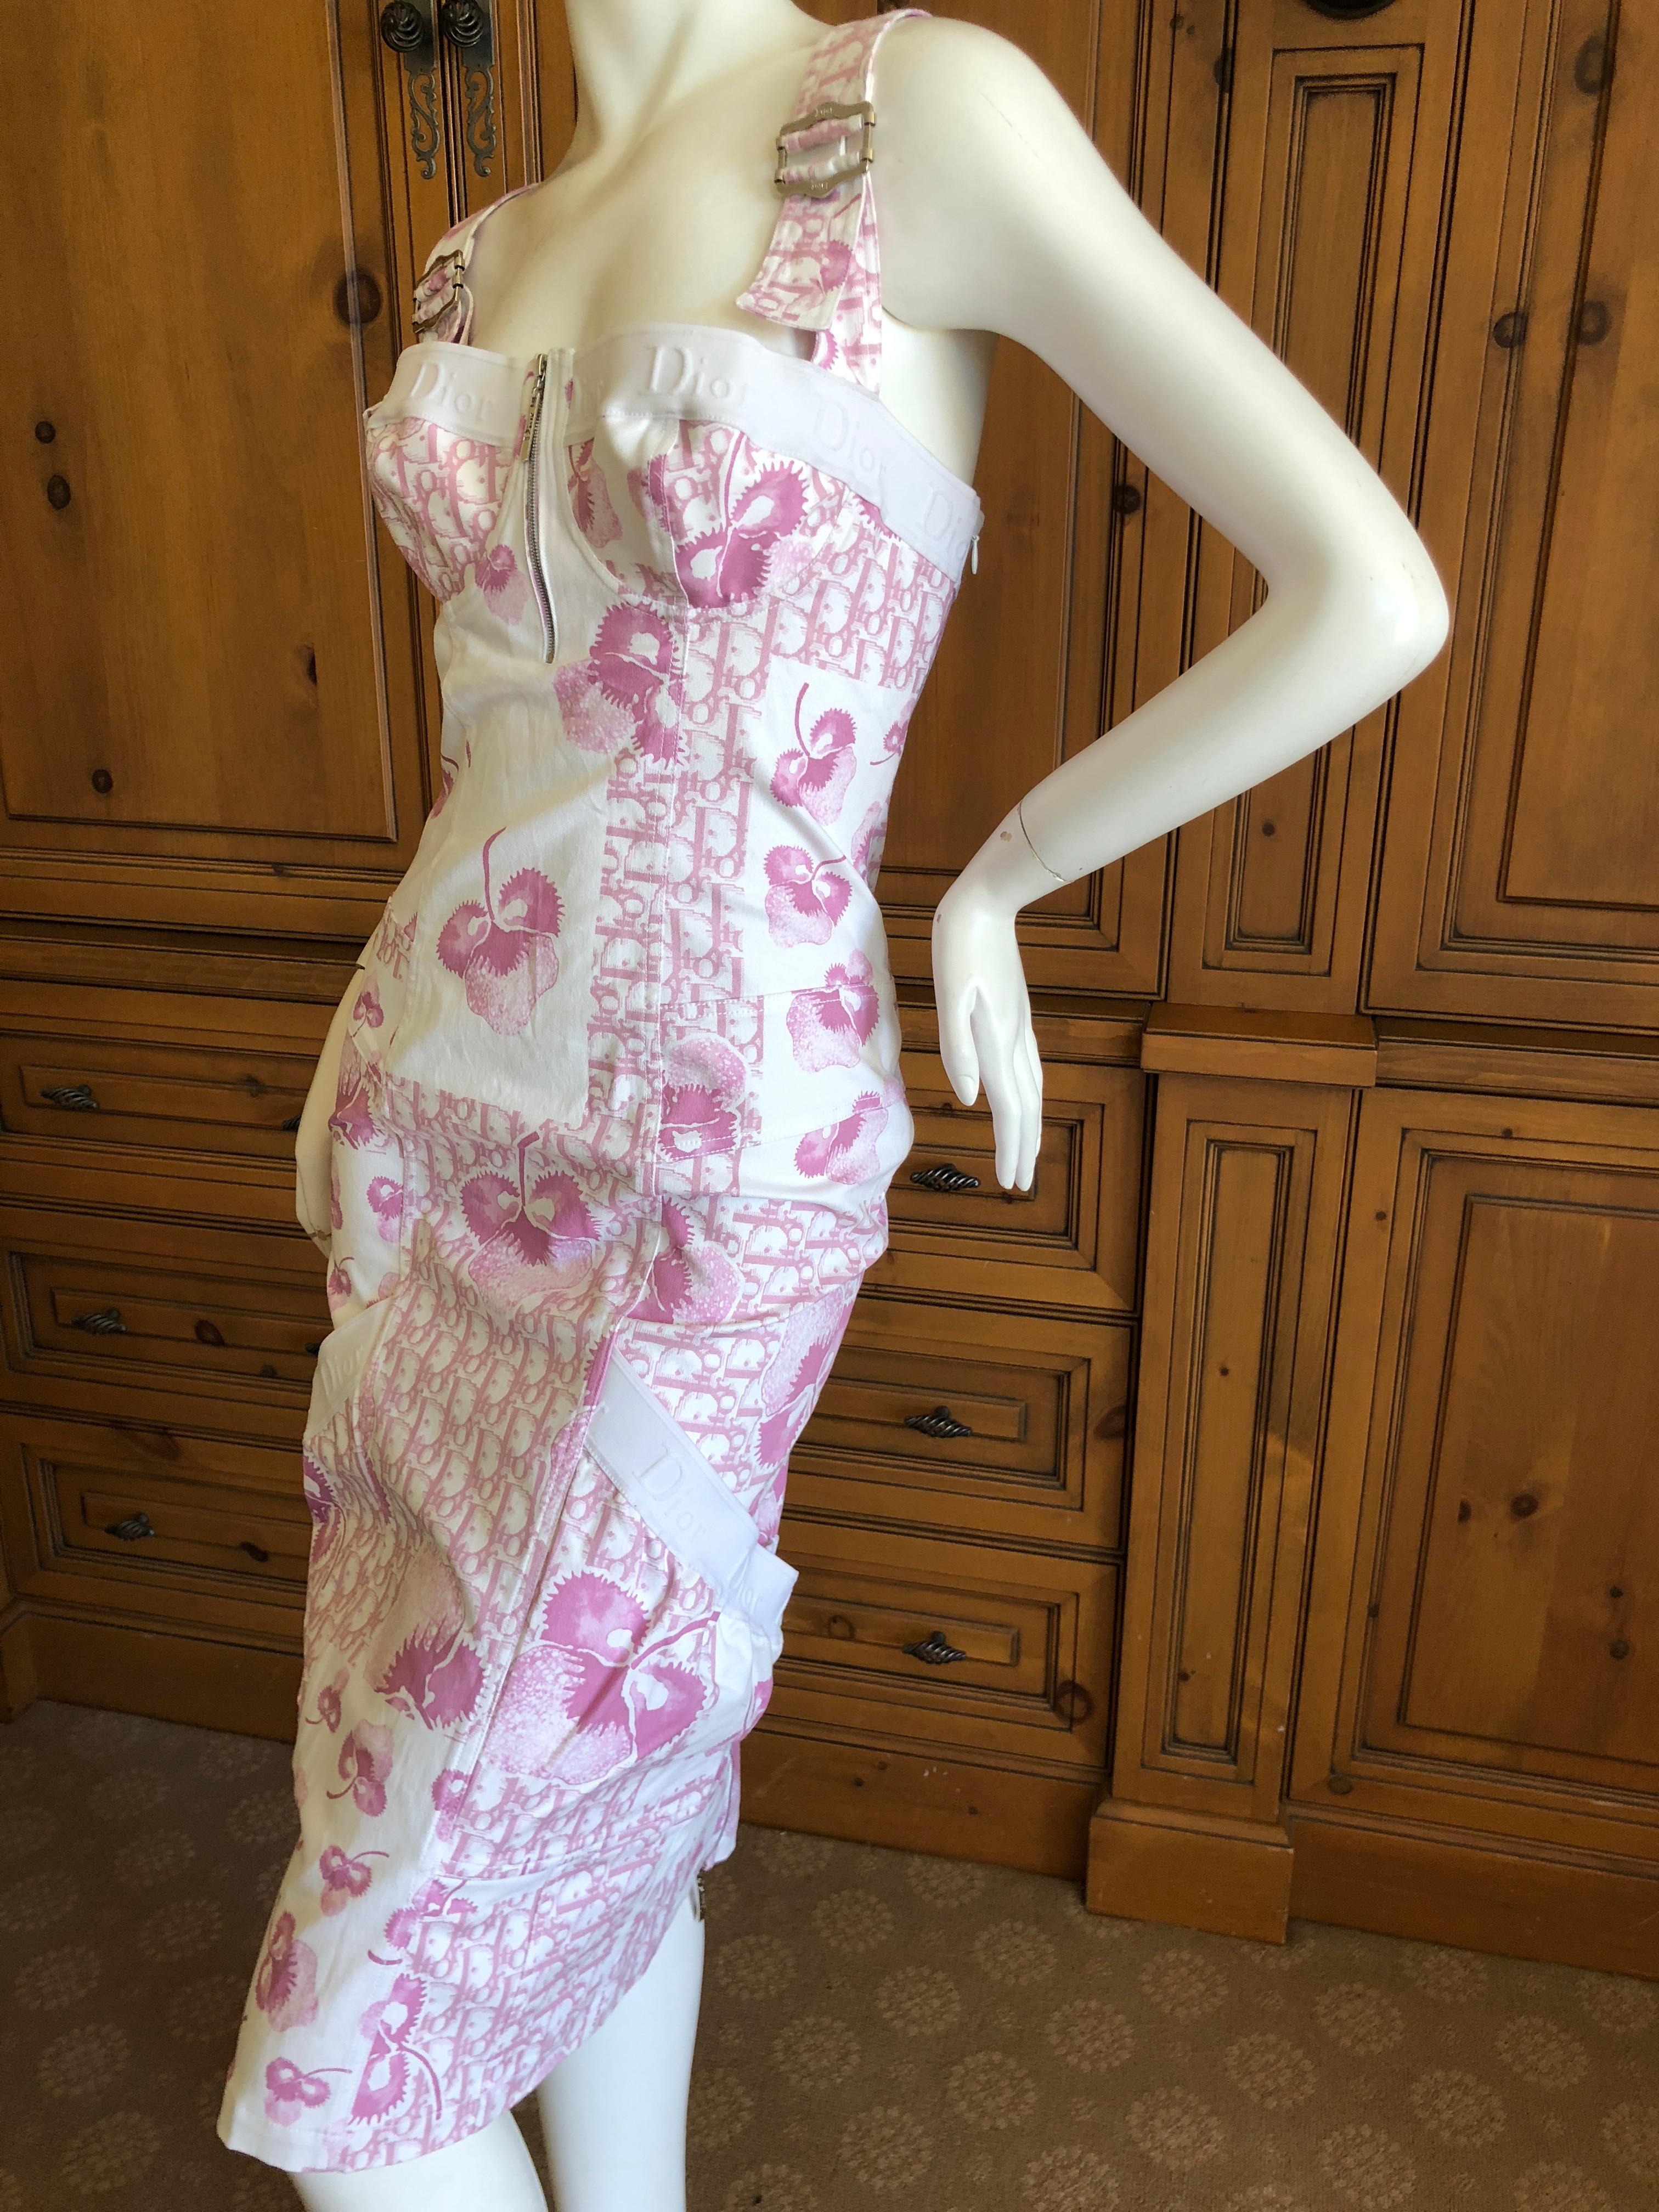 Christian Dior by John Galliano Pink and White Japanese Cherry Blossom Flower Motif Logo Dress

Please llook at all the details with the zoom feature, this is really special.

Size 44 and is true to size, maybe even large

Bust 38